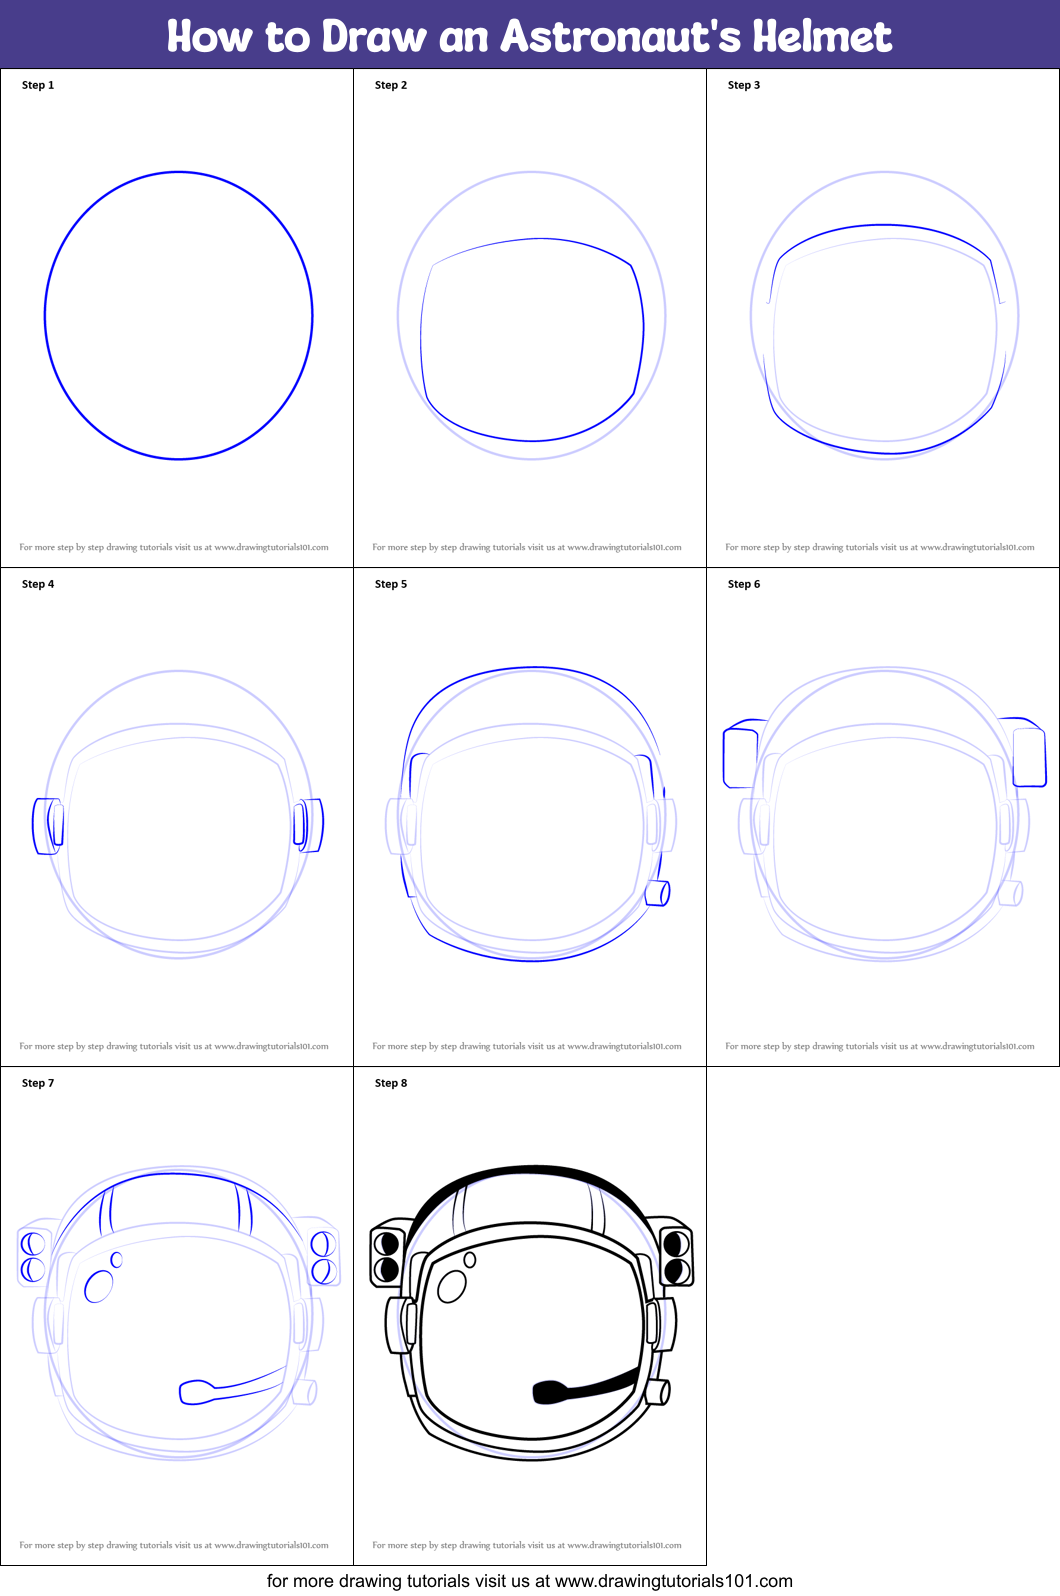 Download How to Draw an Astronaut's Helmet printable step by step drawing sheet : DrawingTutorials101.com